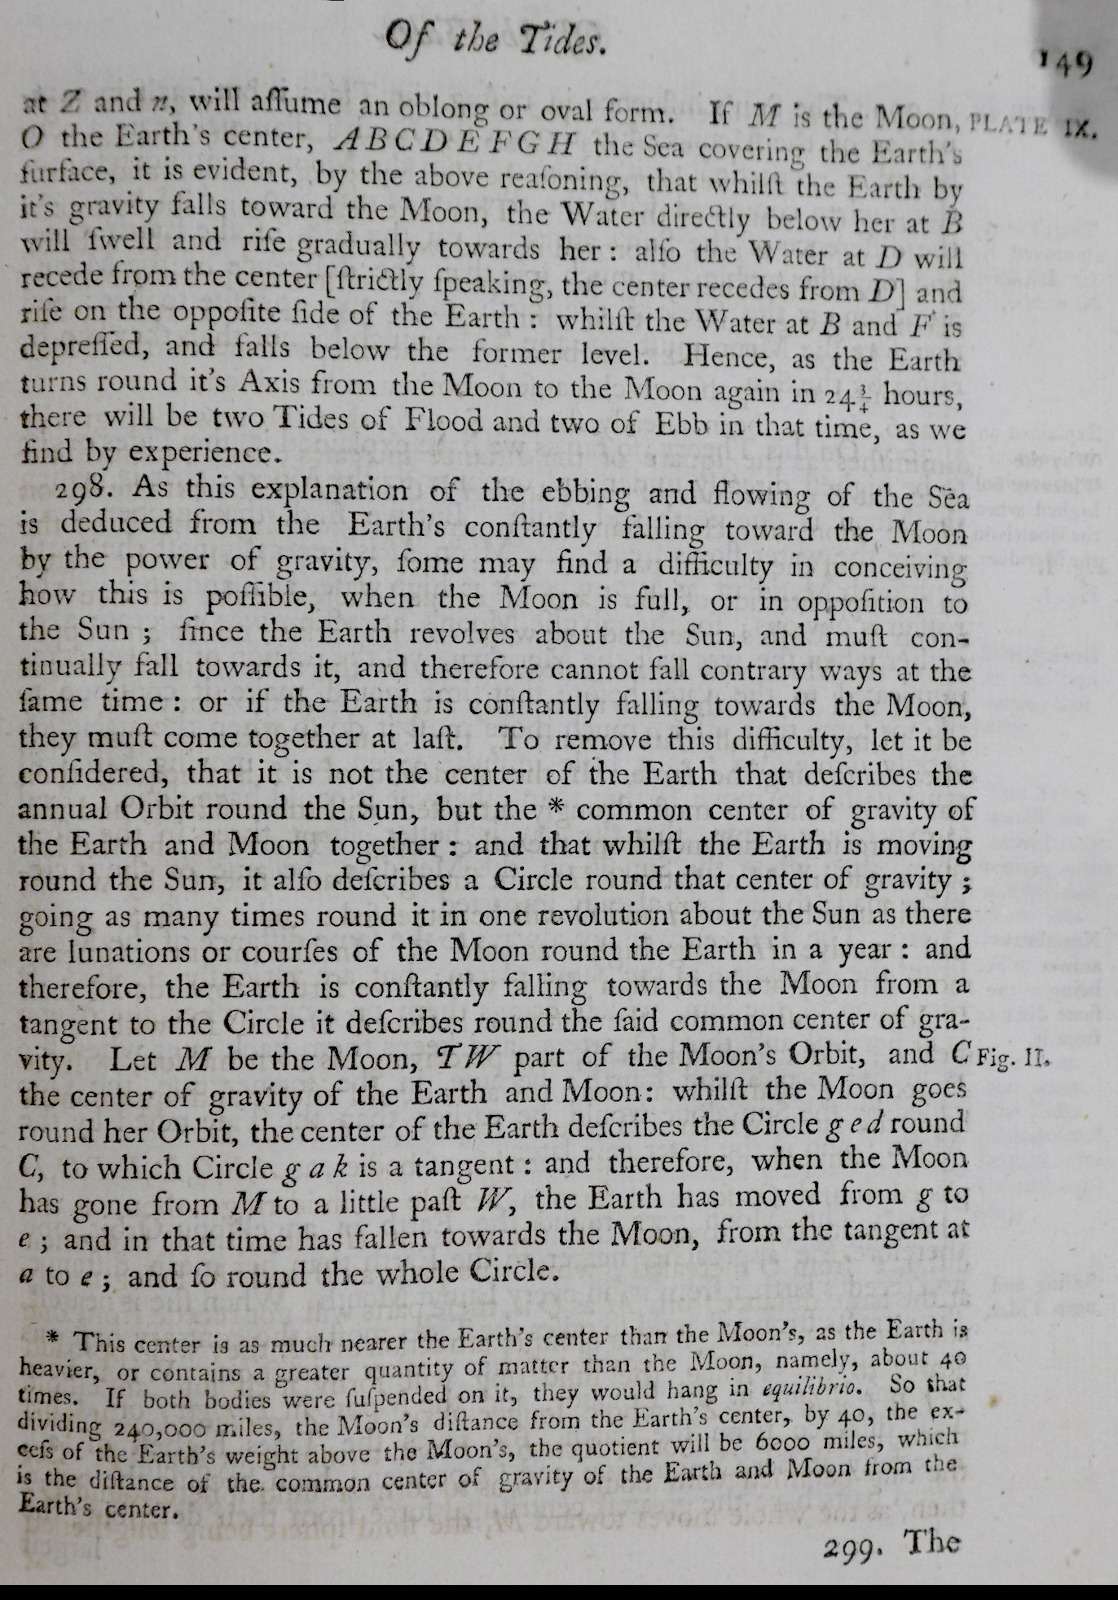 Image of page 149 from Ferguson's Astronomy, third edition, 1764